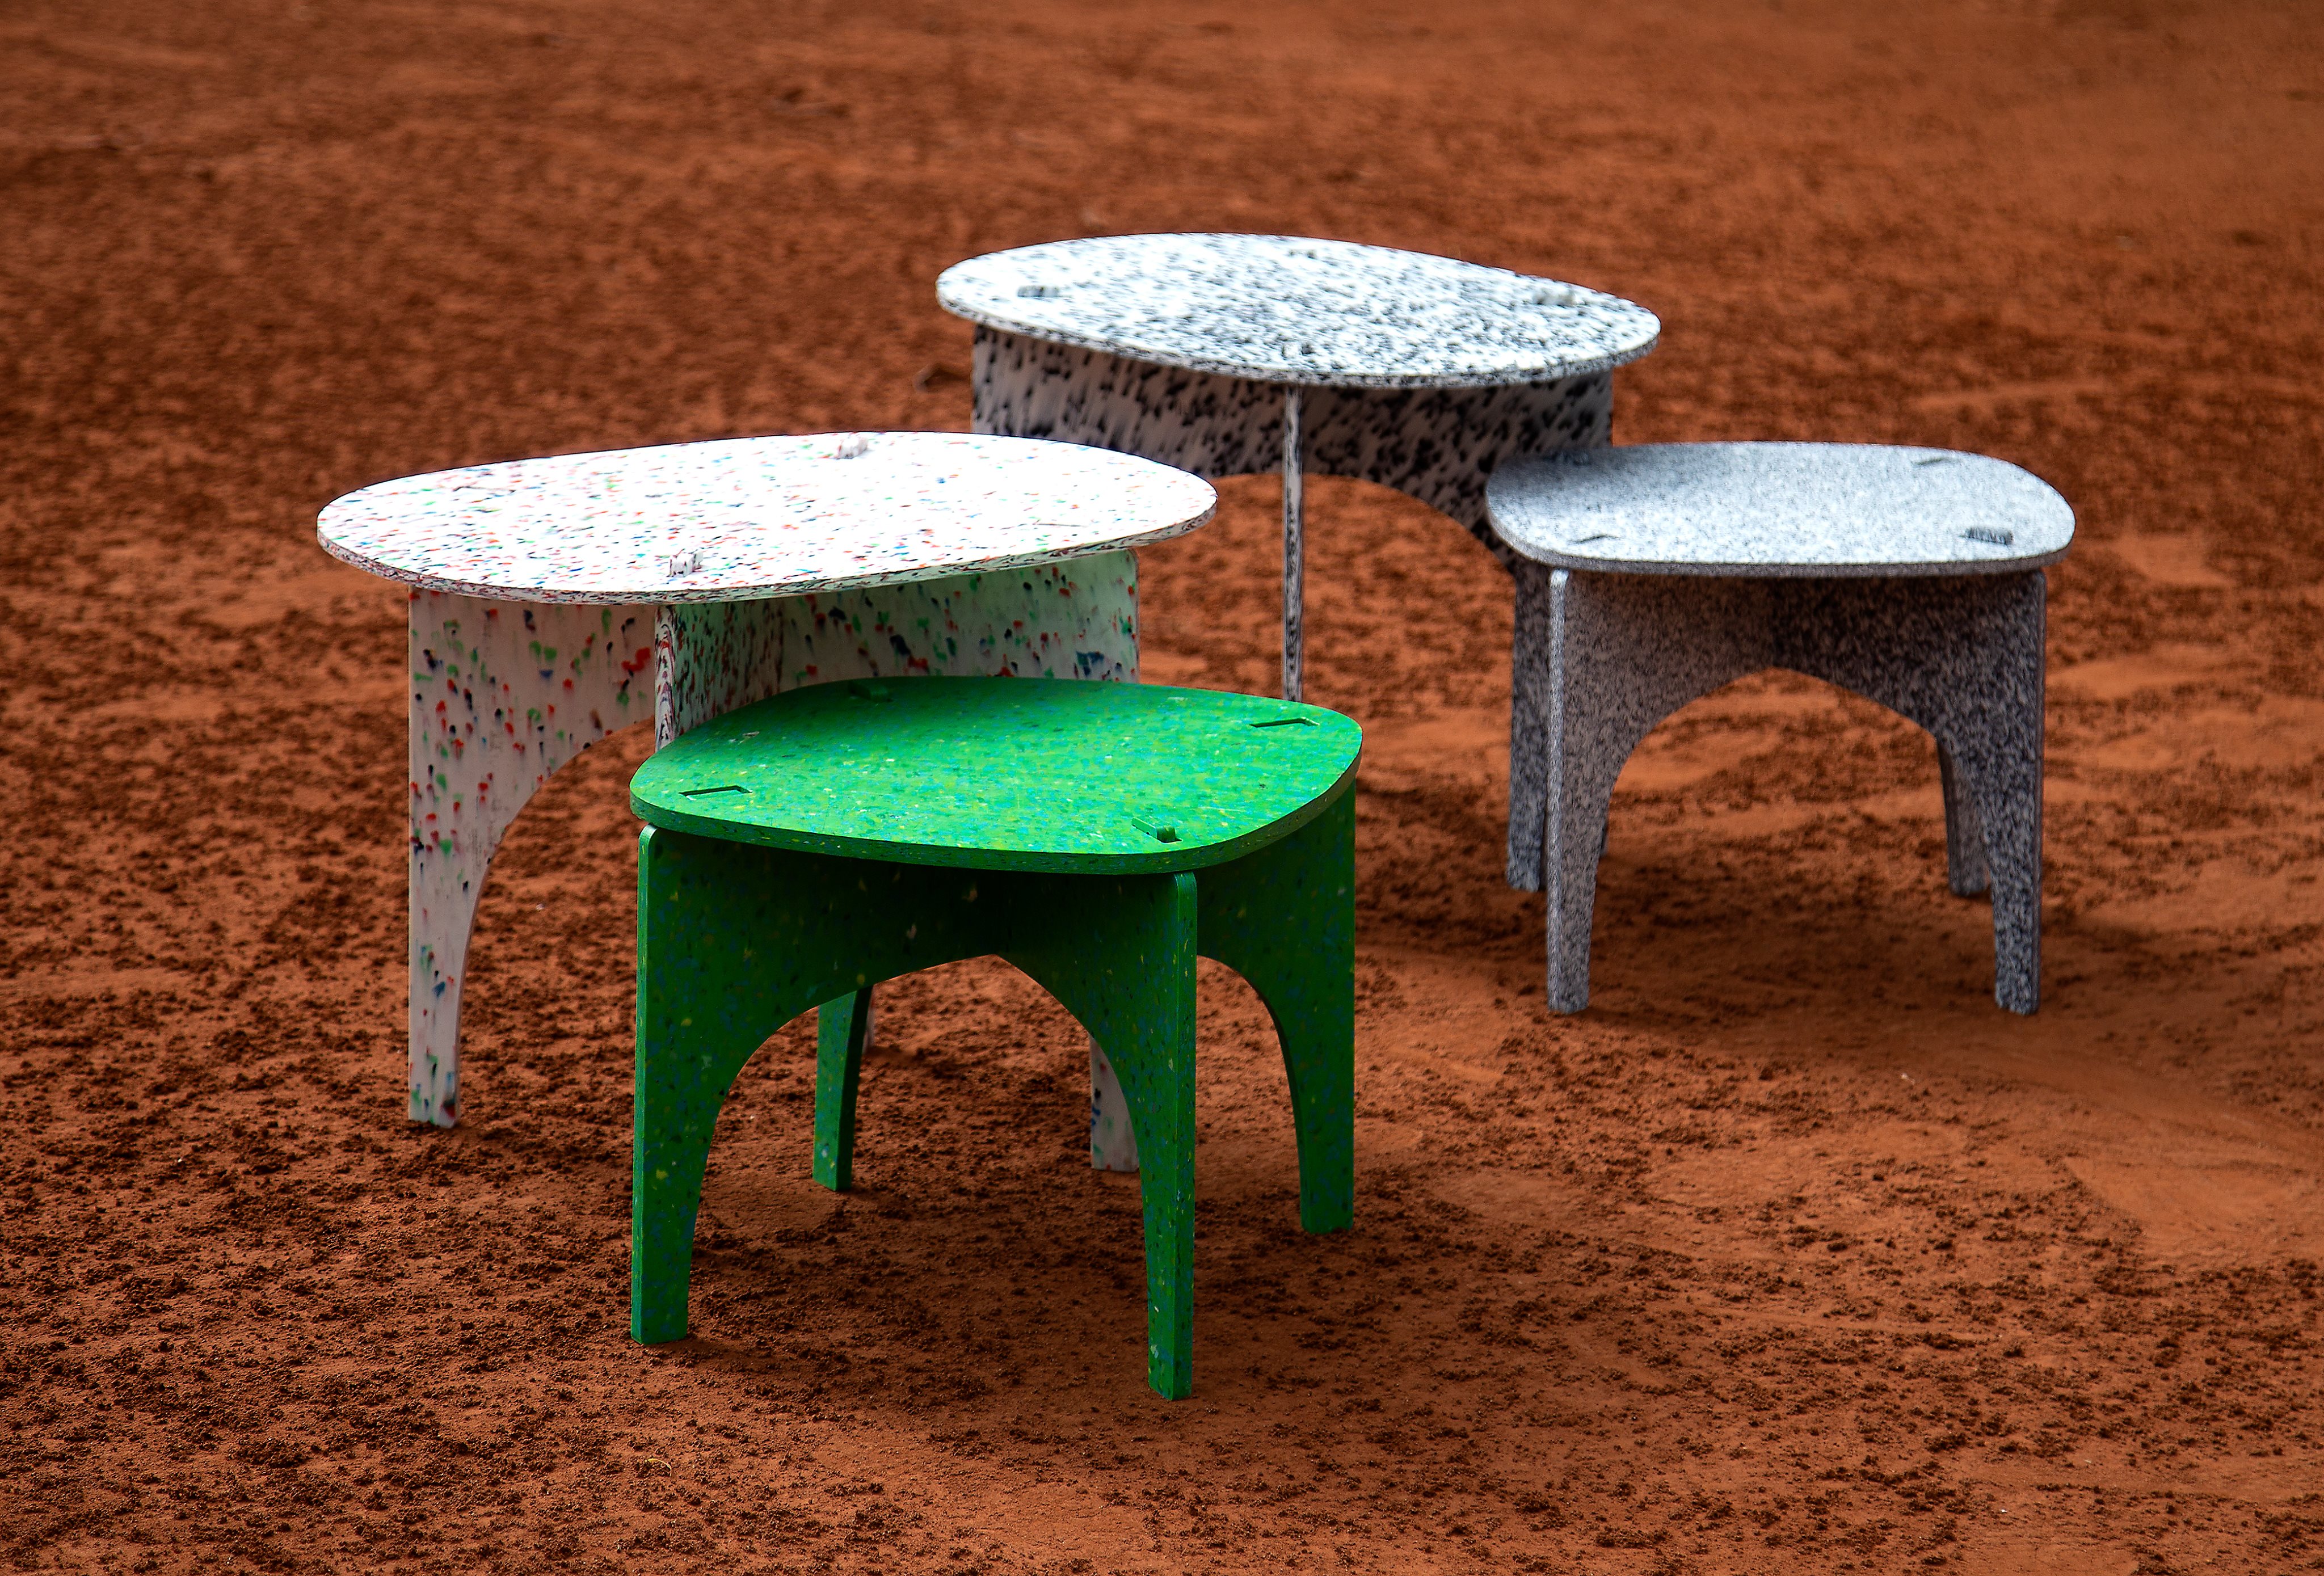 Flatpack furniture made from recycled plastic - MaterialDistrict